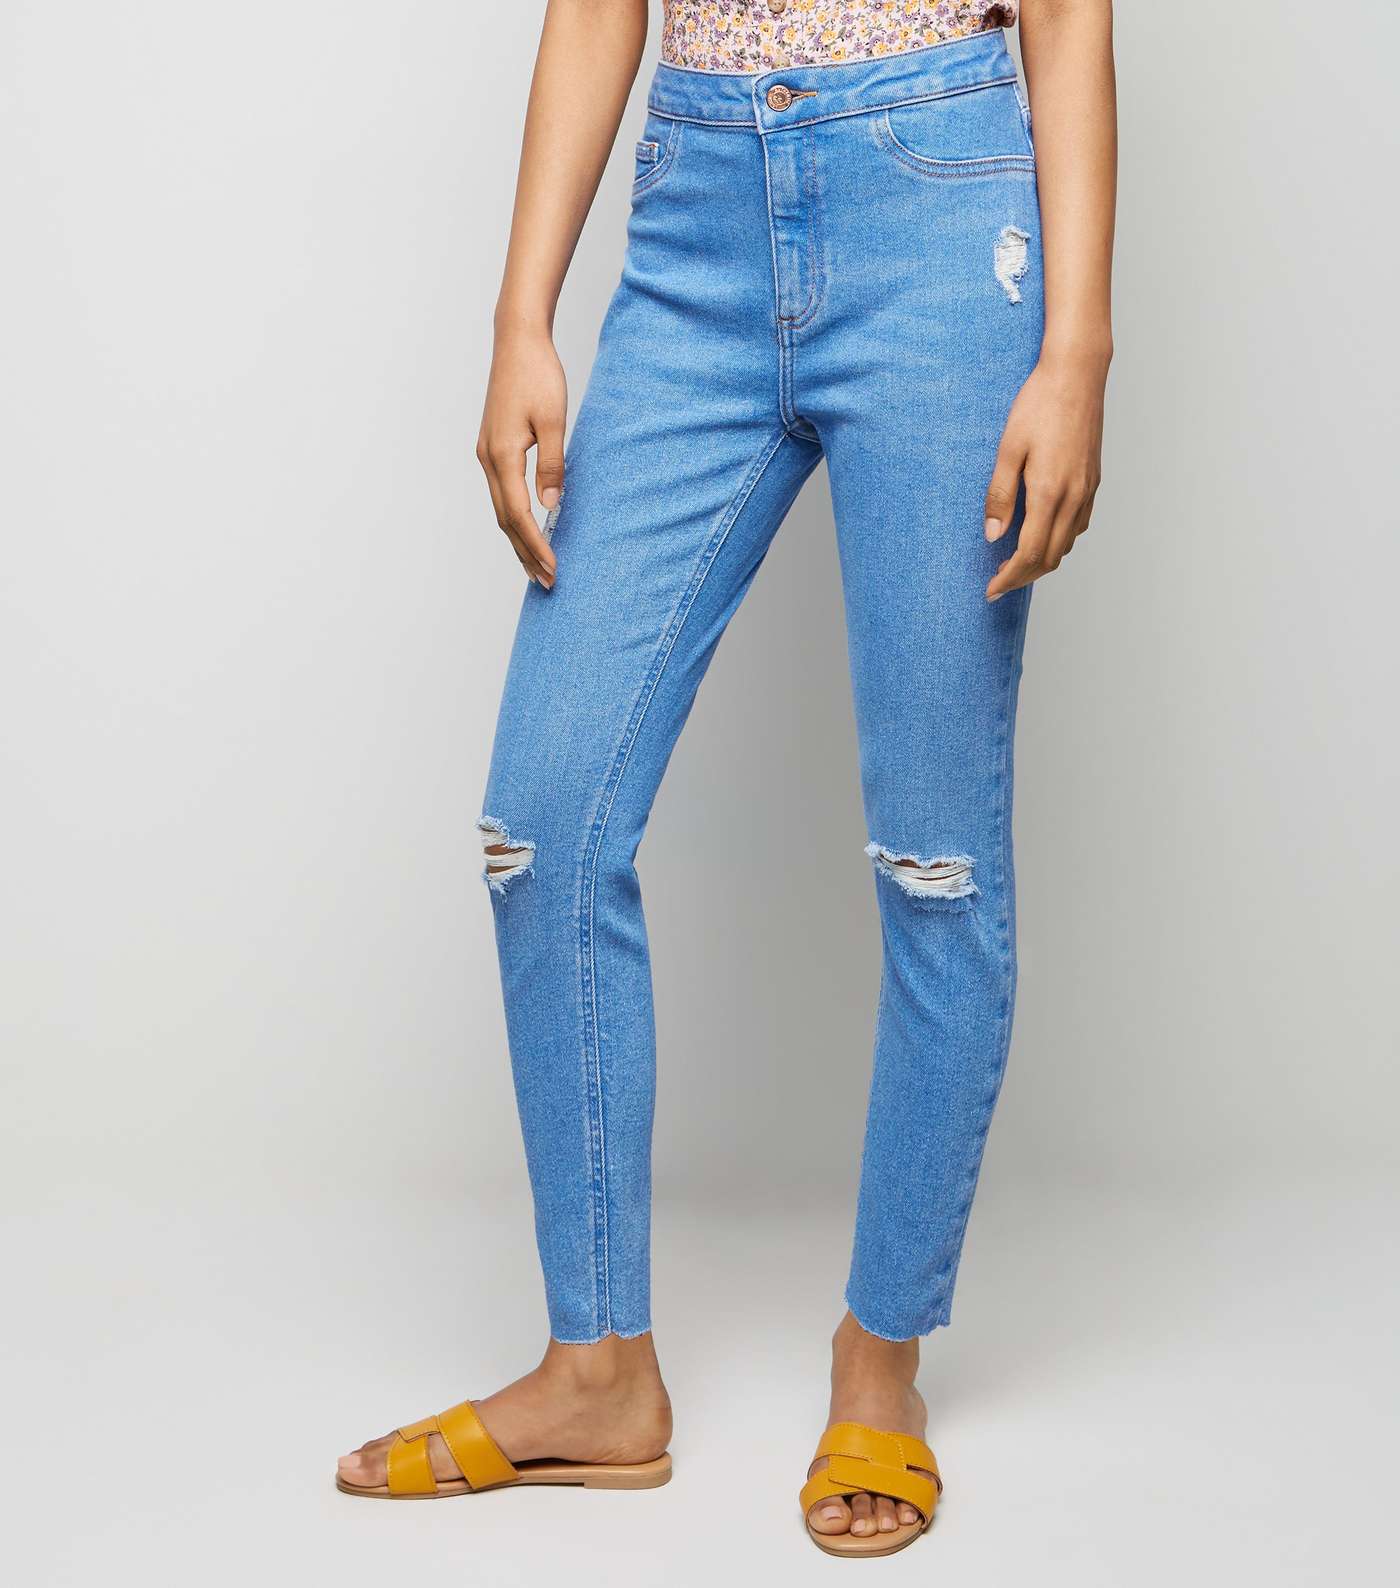 Petite Bright Blue High Waist Ripped Skinny Jeans Image 2